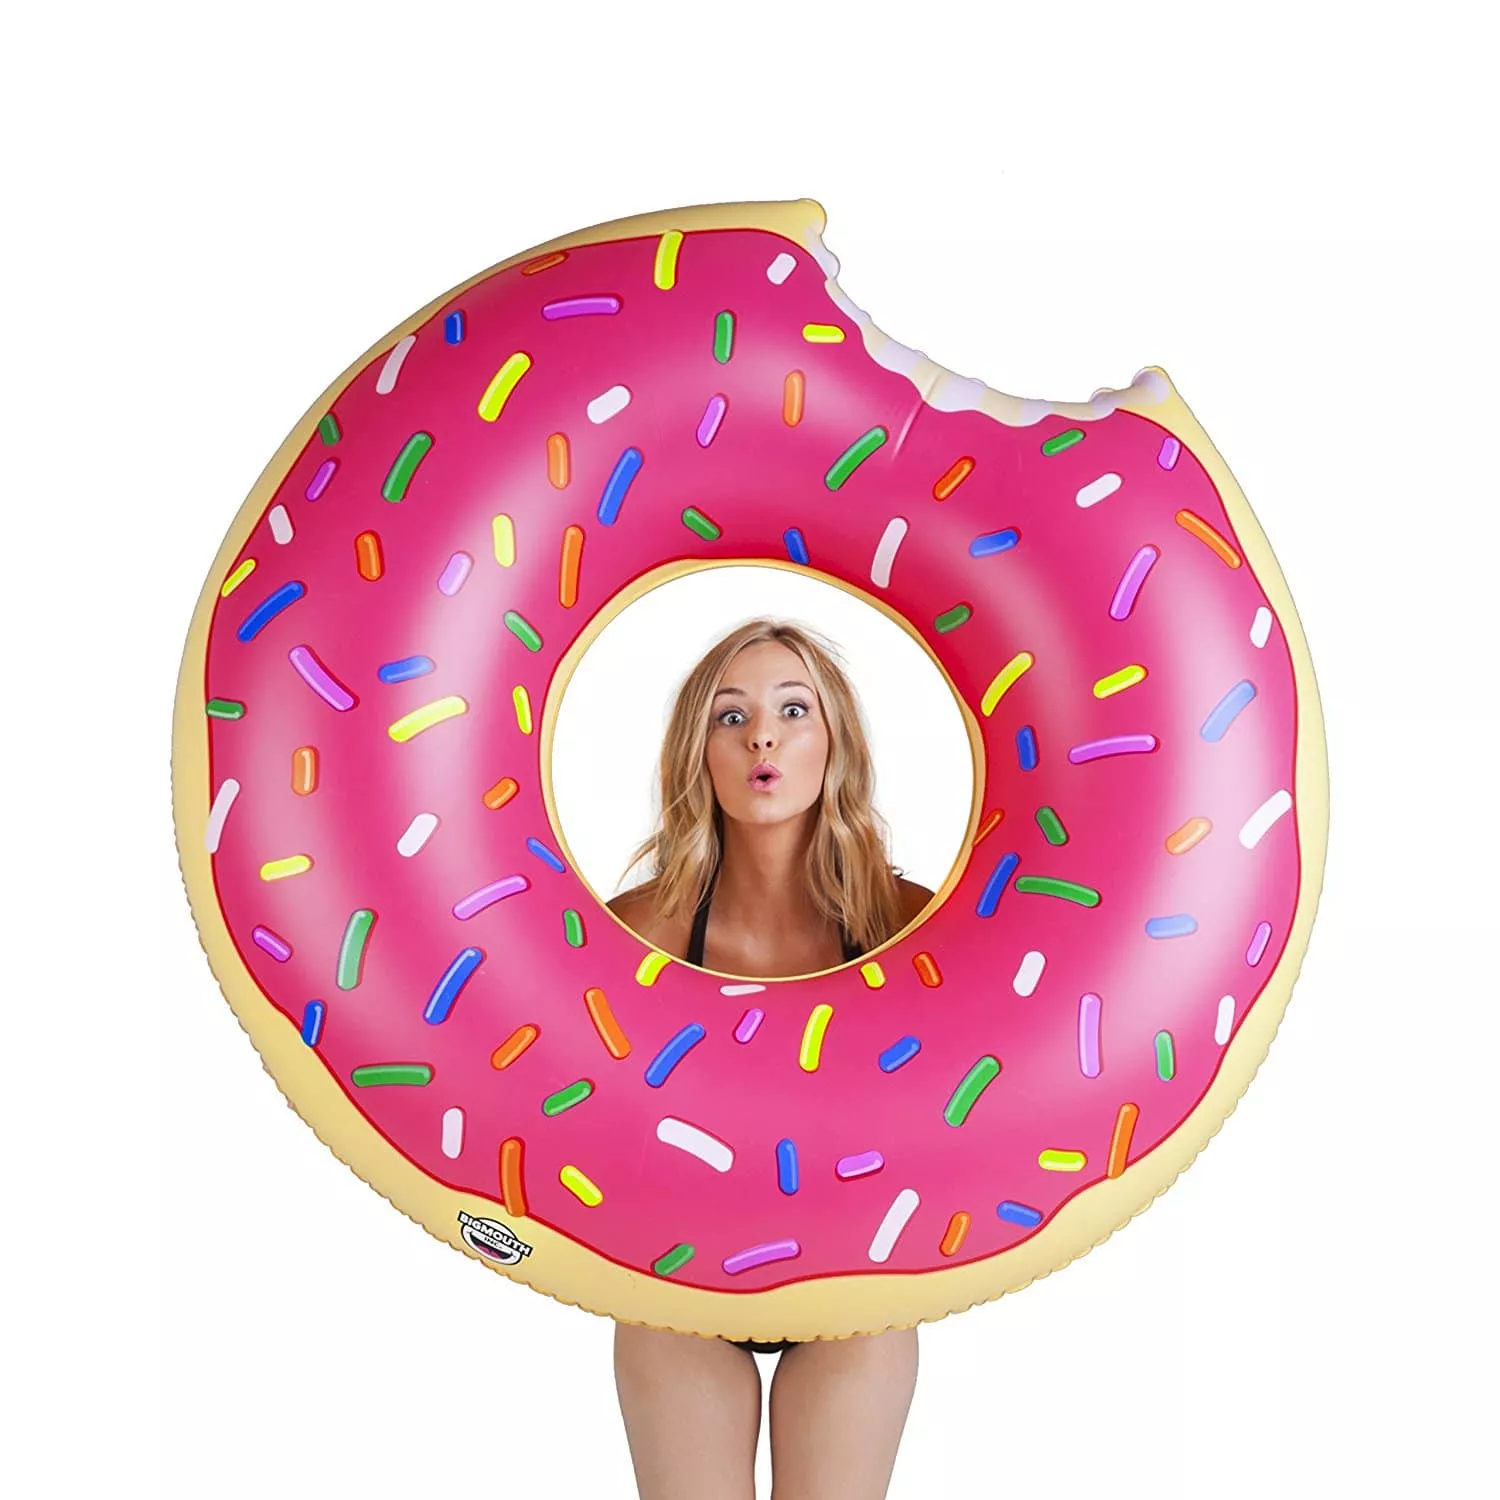 Funny Pool Floats 2018: Pink donut Raft